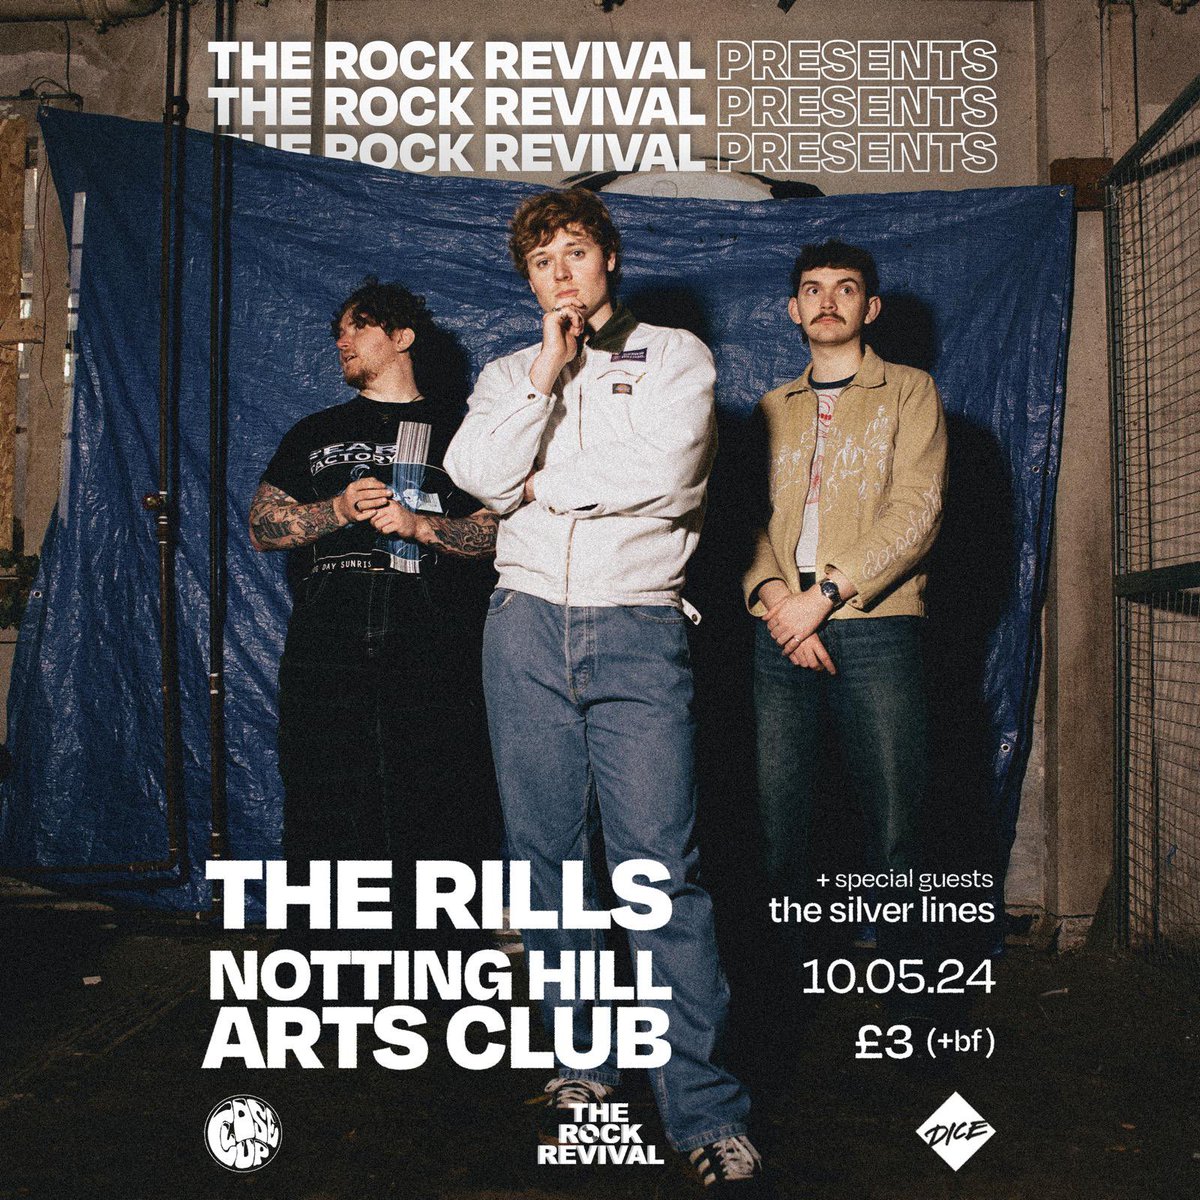 London here we come. We’re supporting @therillsband 10th May at the Notting Hill Arts Club London. Grab your tickets now as these will fly only £3 - link in our bio x @TheRockRevival_ @Closeuppromo @NHAClub